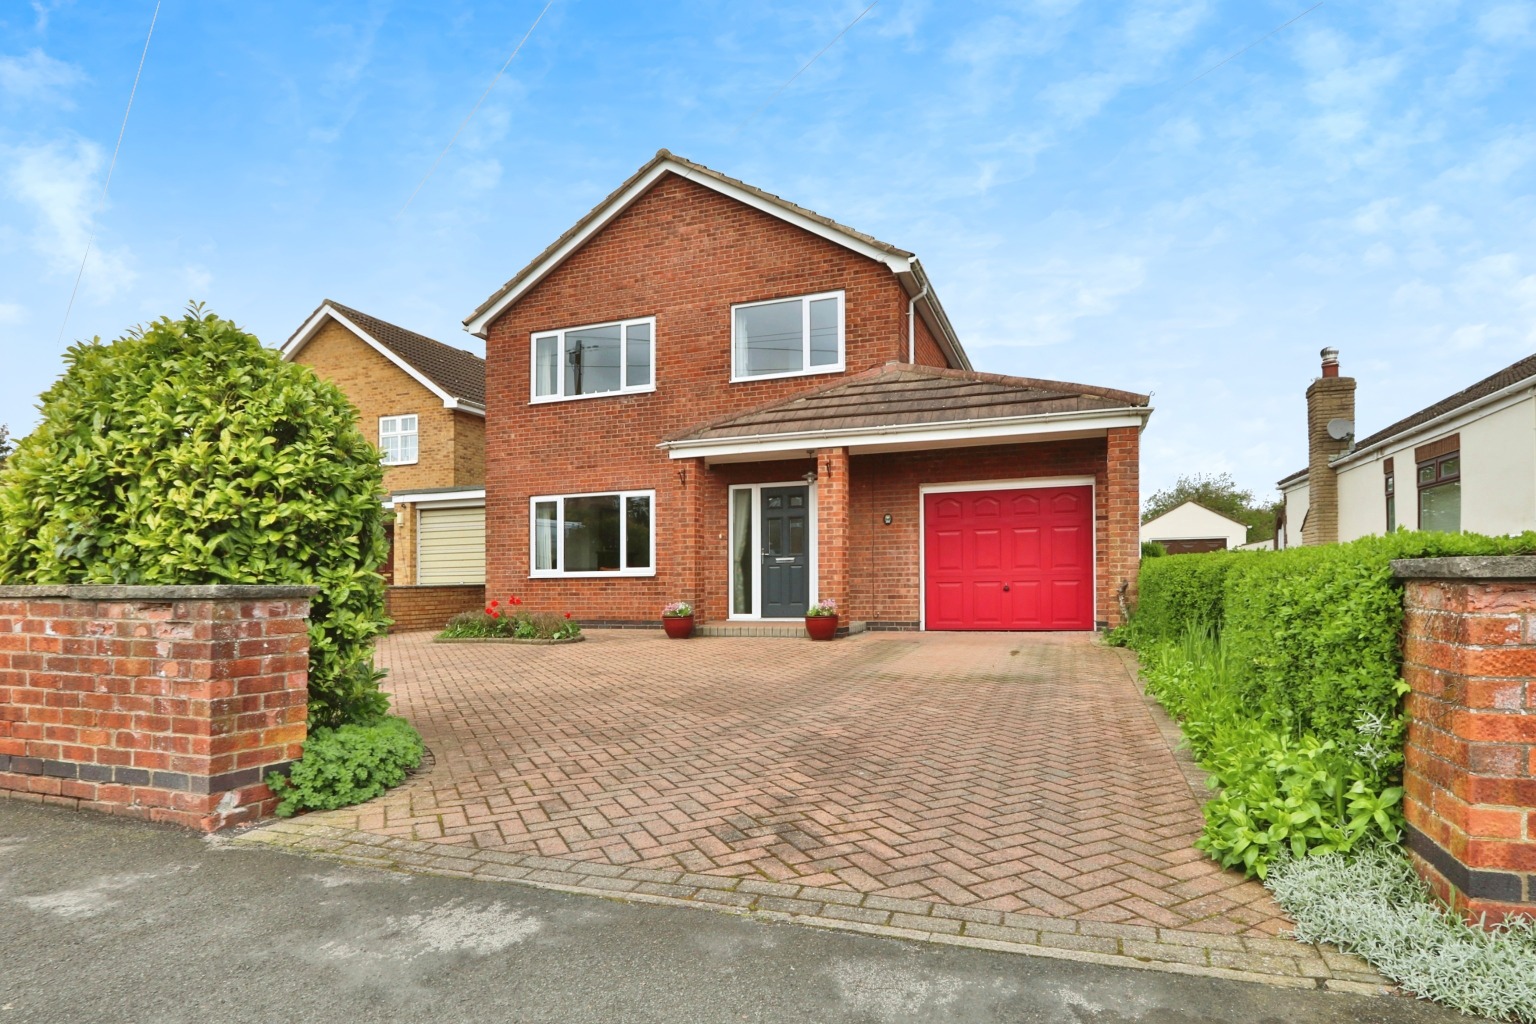 4 bed detached house for sale in Inmans Road, Hull - Property Image 1